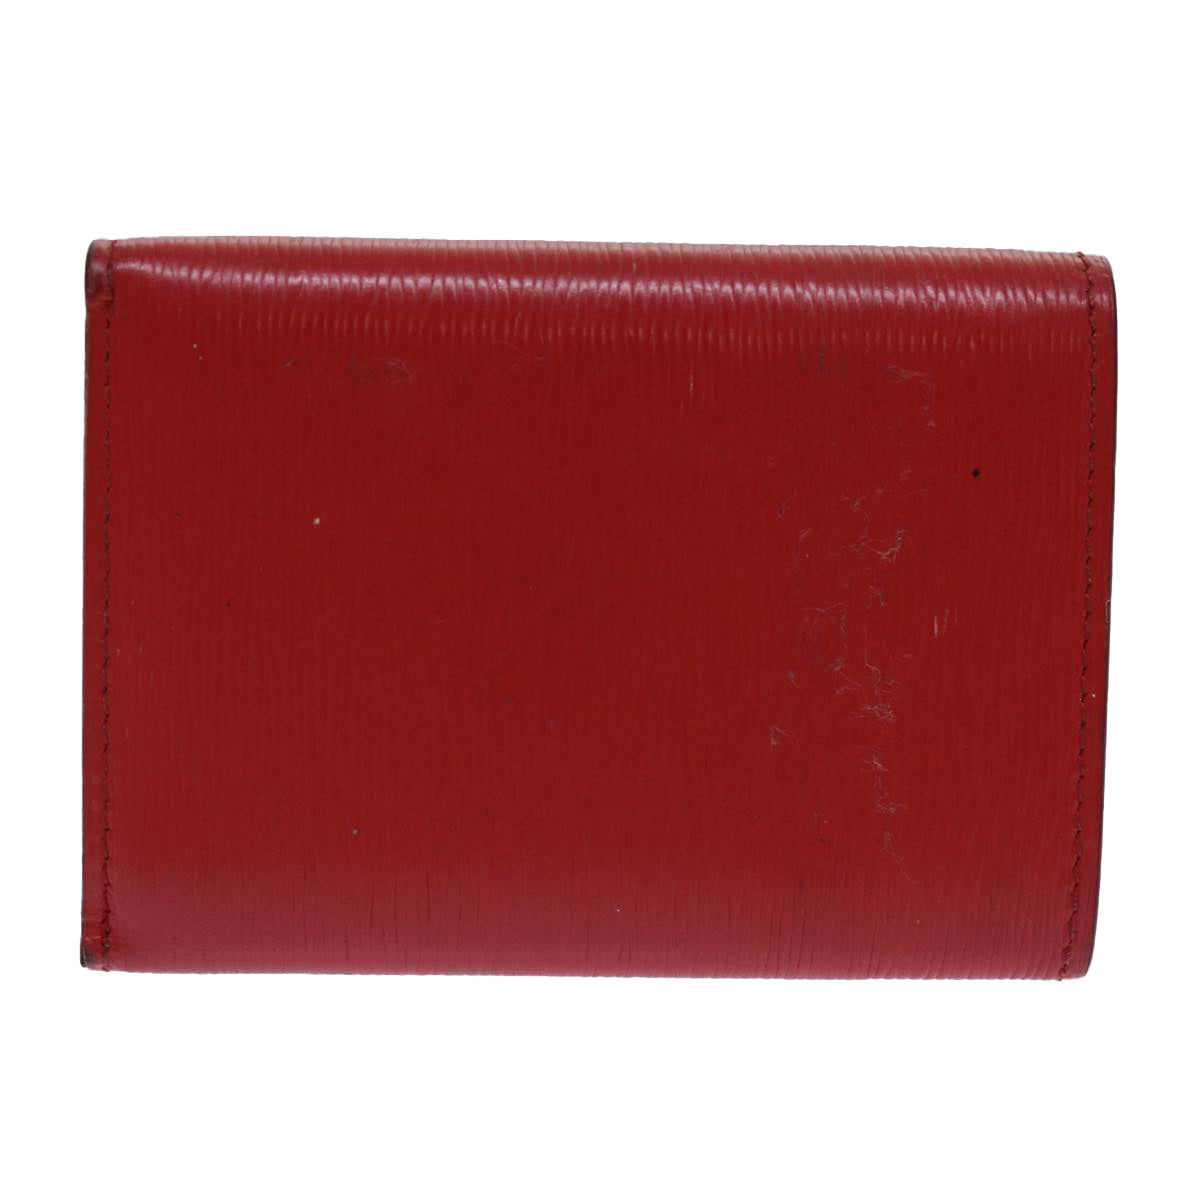 PRADA Wallet Safiano leather Red Auth 71619 - 0